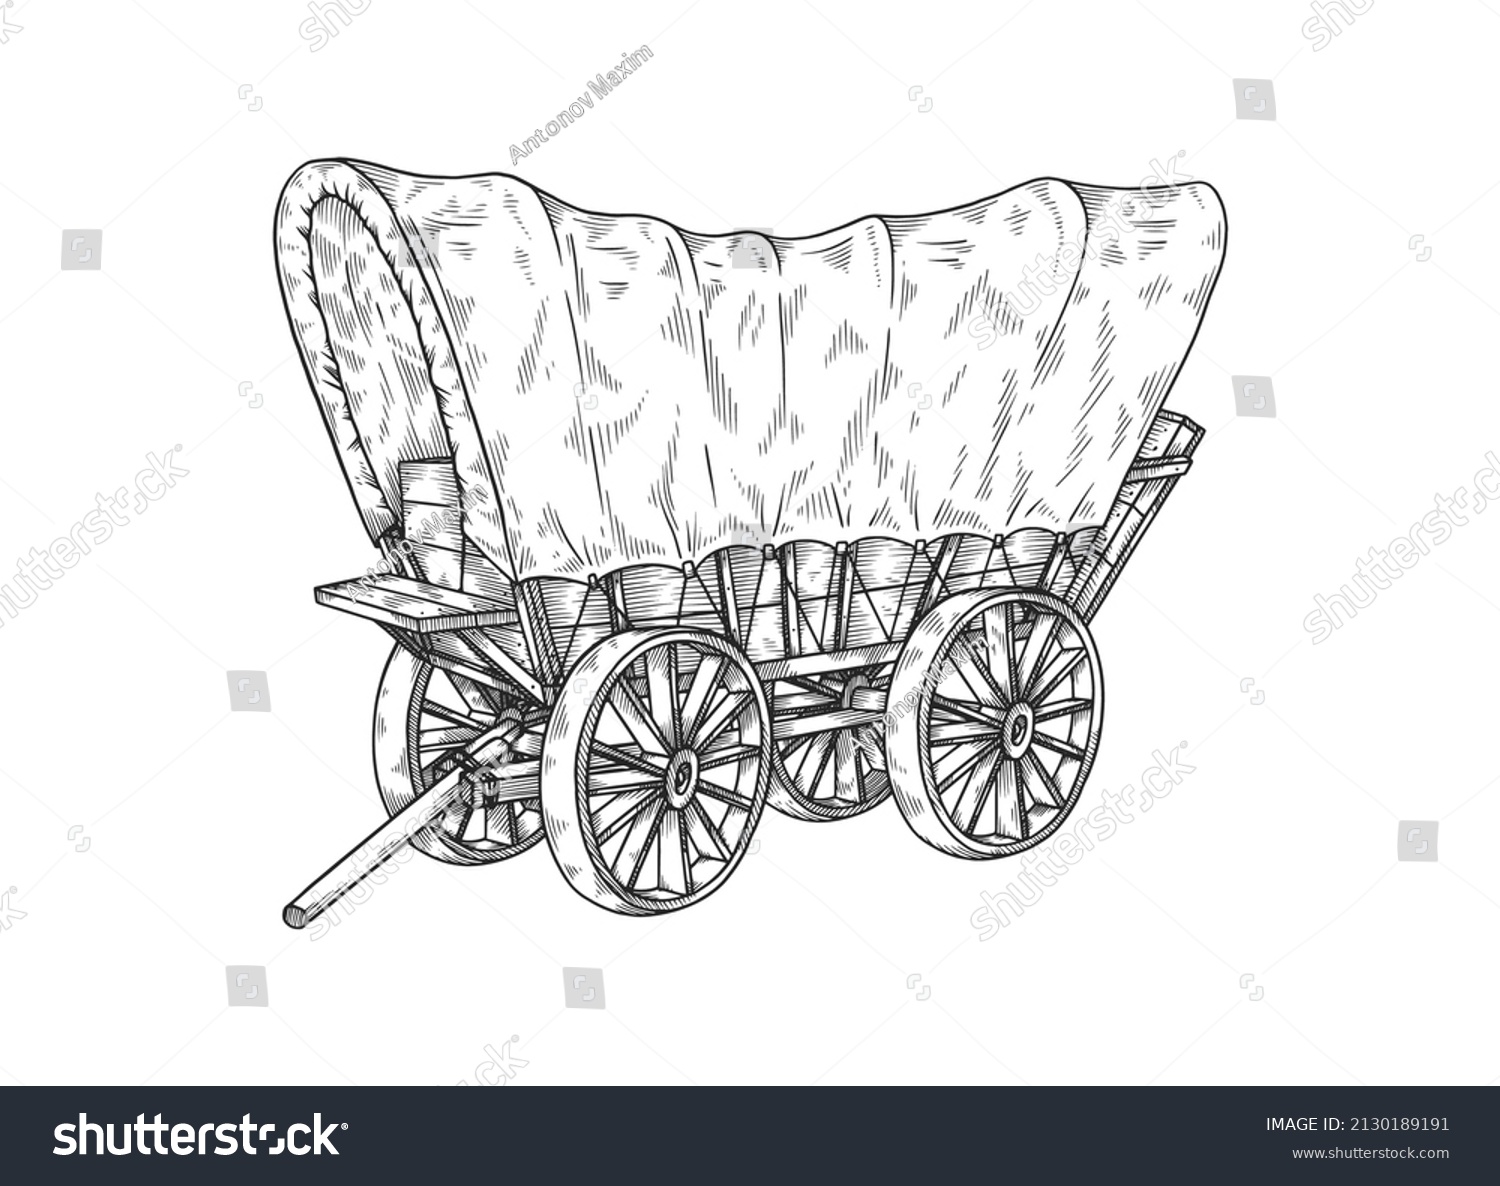 SVG of Vintage old covered with tent Western wagon with shafts and without horse, sketch or engraving style vector illustration isolated on white background. svg